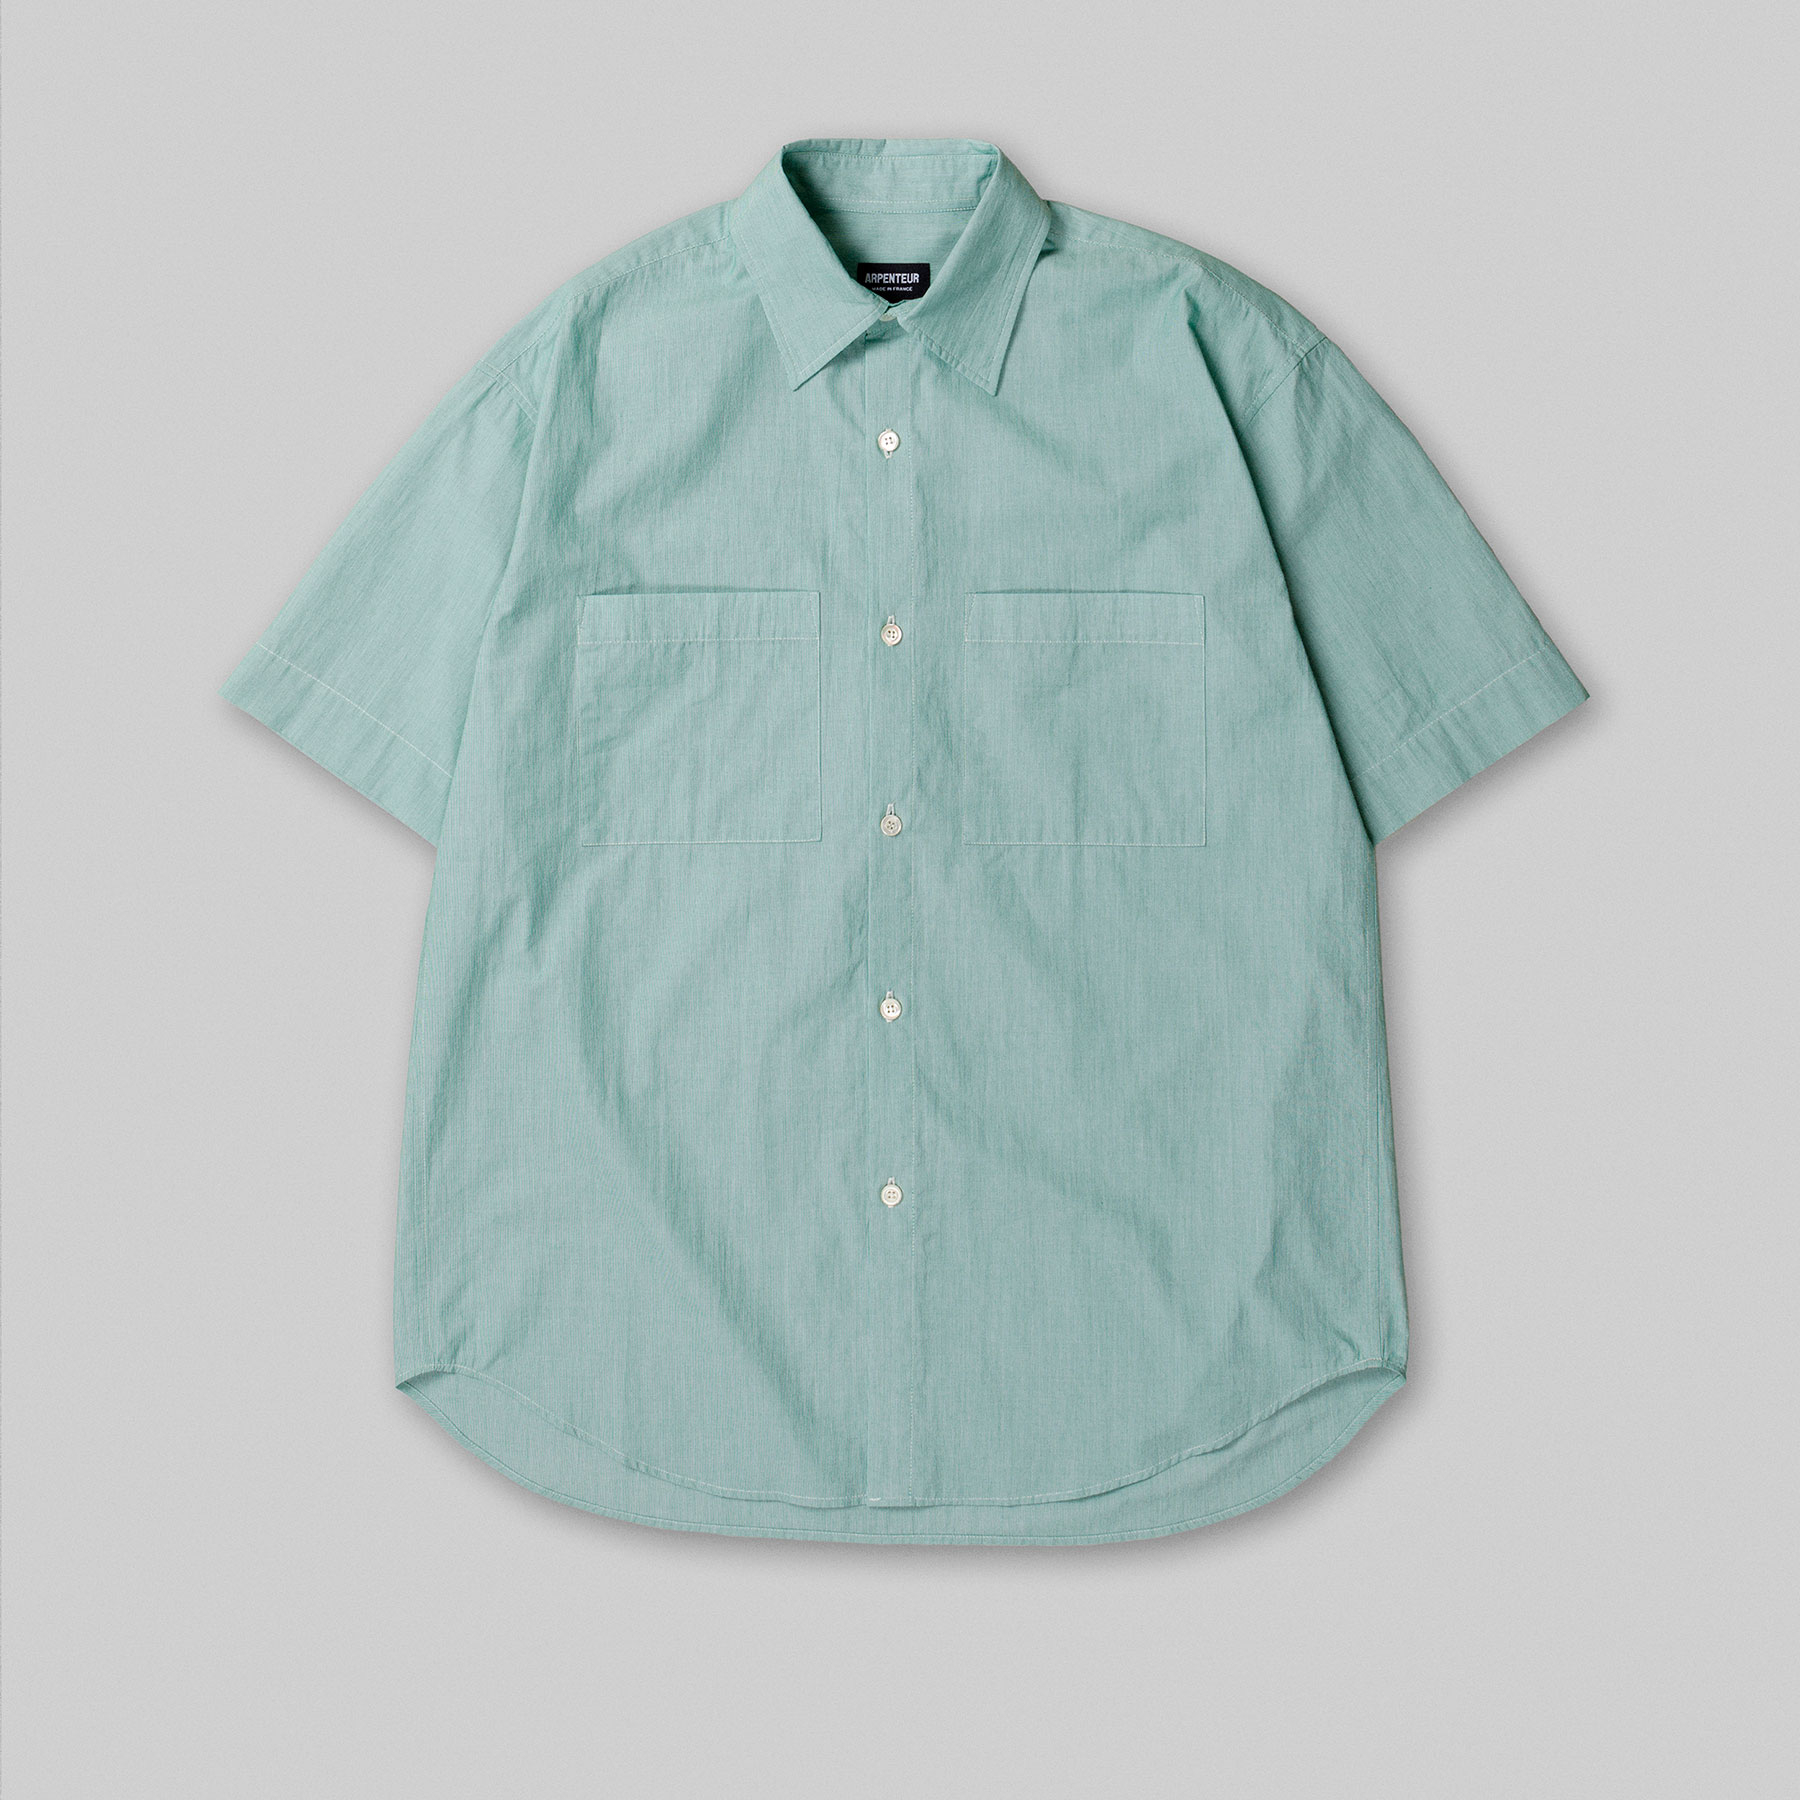 STEREO shirt by Arpenteur in Green color